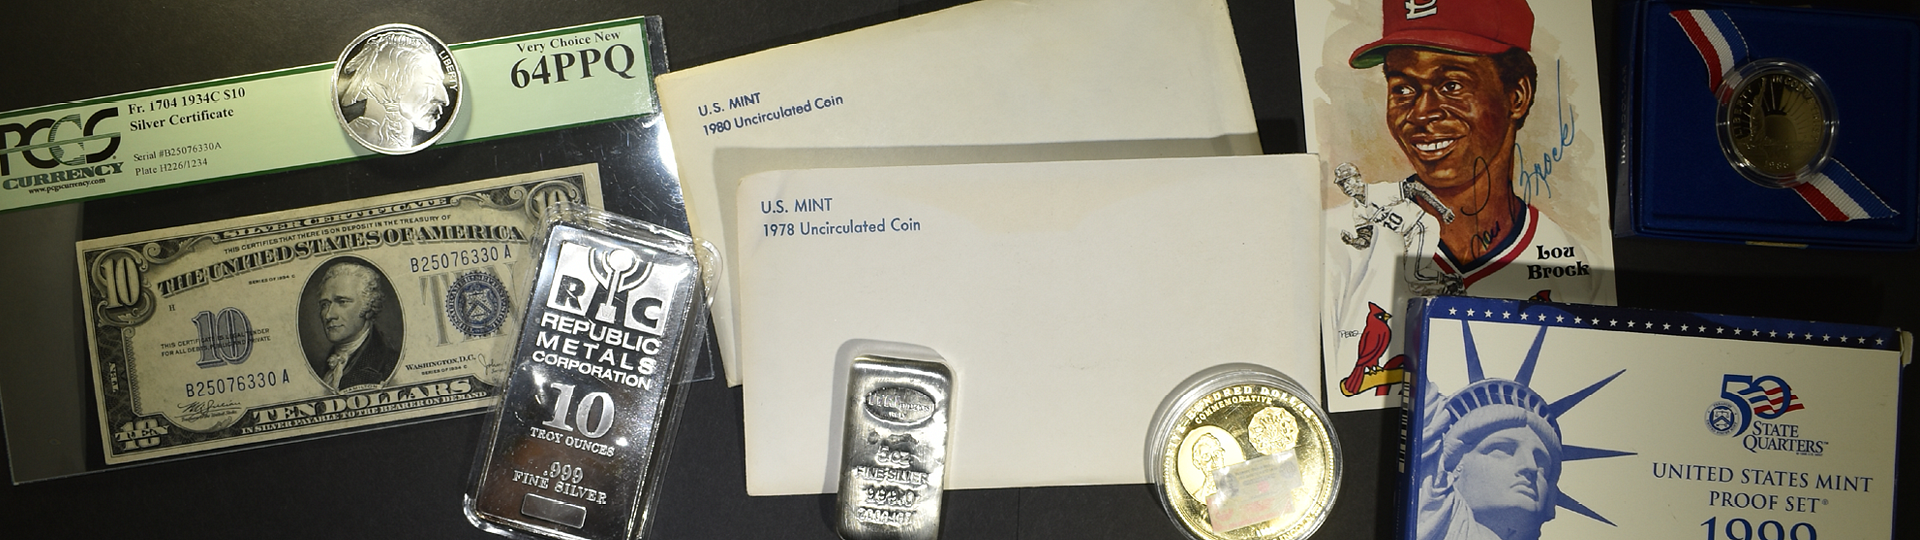 March 19th Silver City Rare Coins & Currency by Silver City Auctions